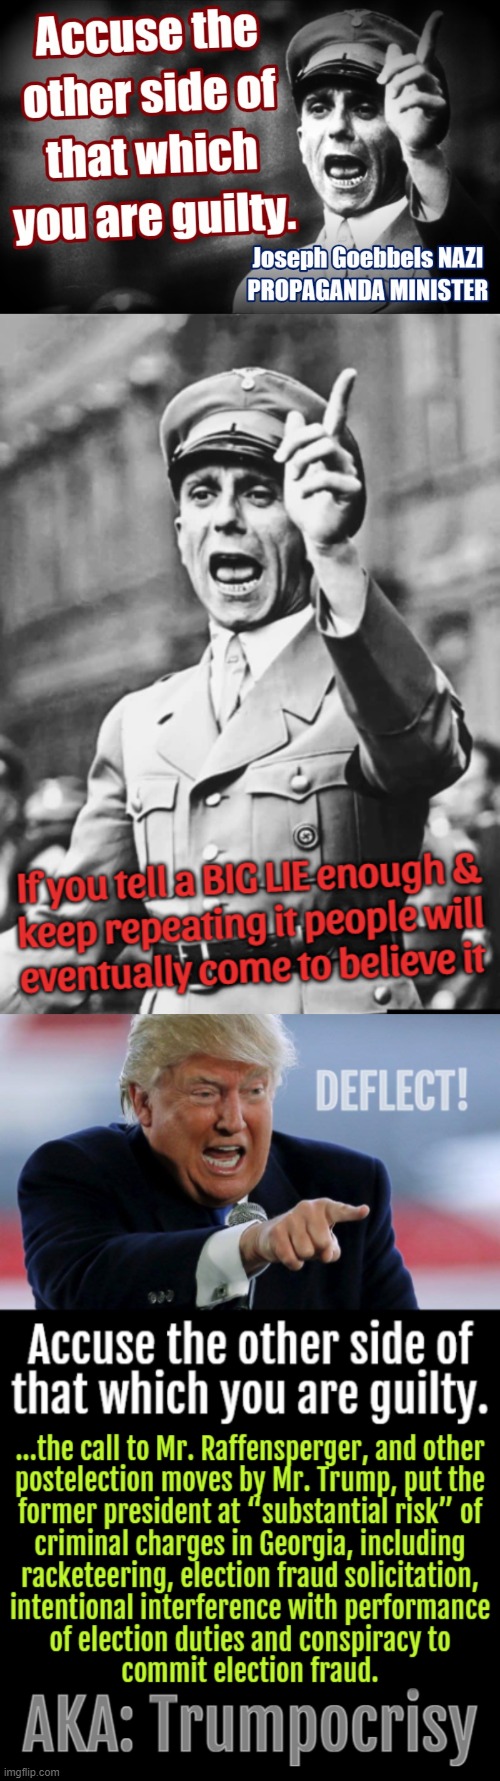 FASCIST PROPAGANDA THEN AND NOW, it never goes out of style...  8 ( | image tagged in nazis,neo-nazis,propaganda,fascism,it's that obvious | made w/ Imgflip meme maker